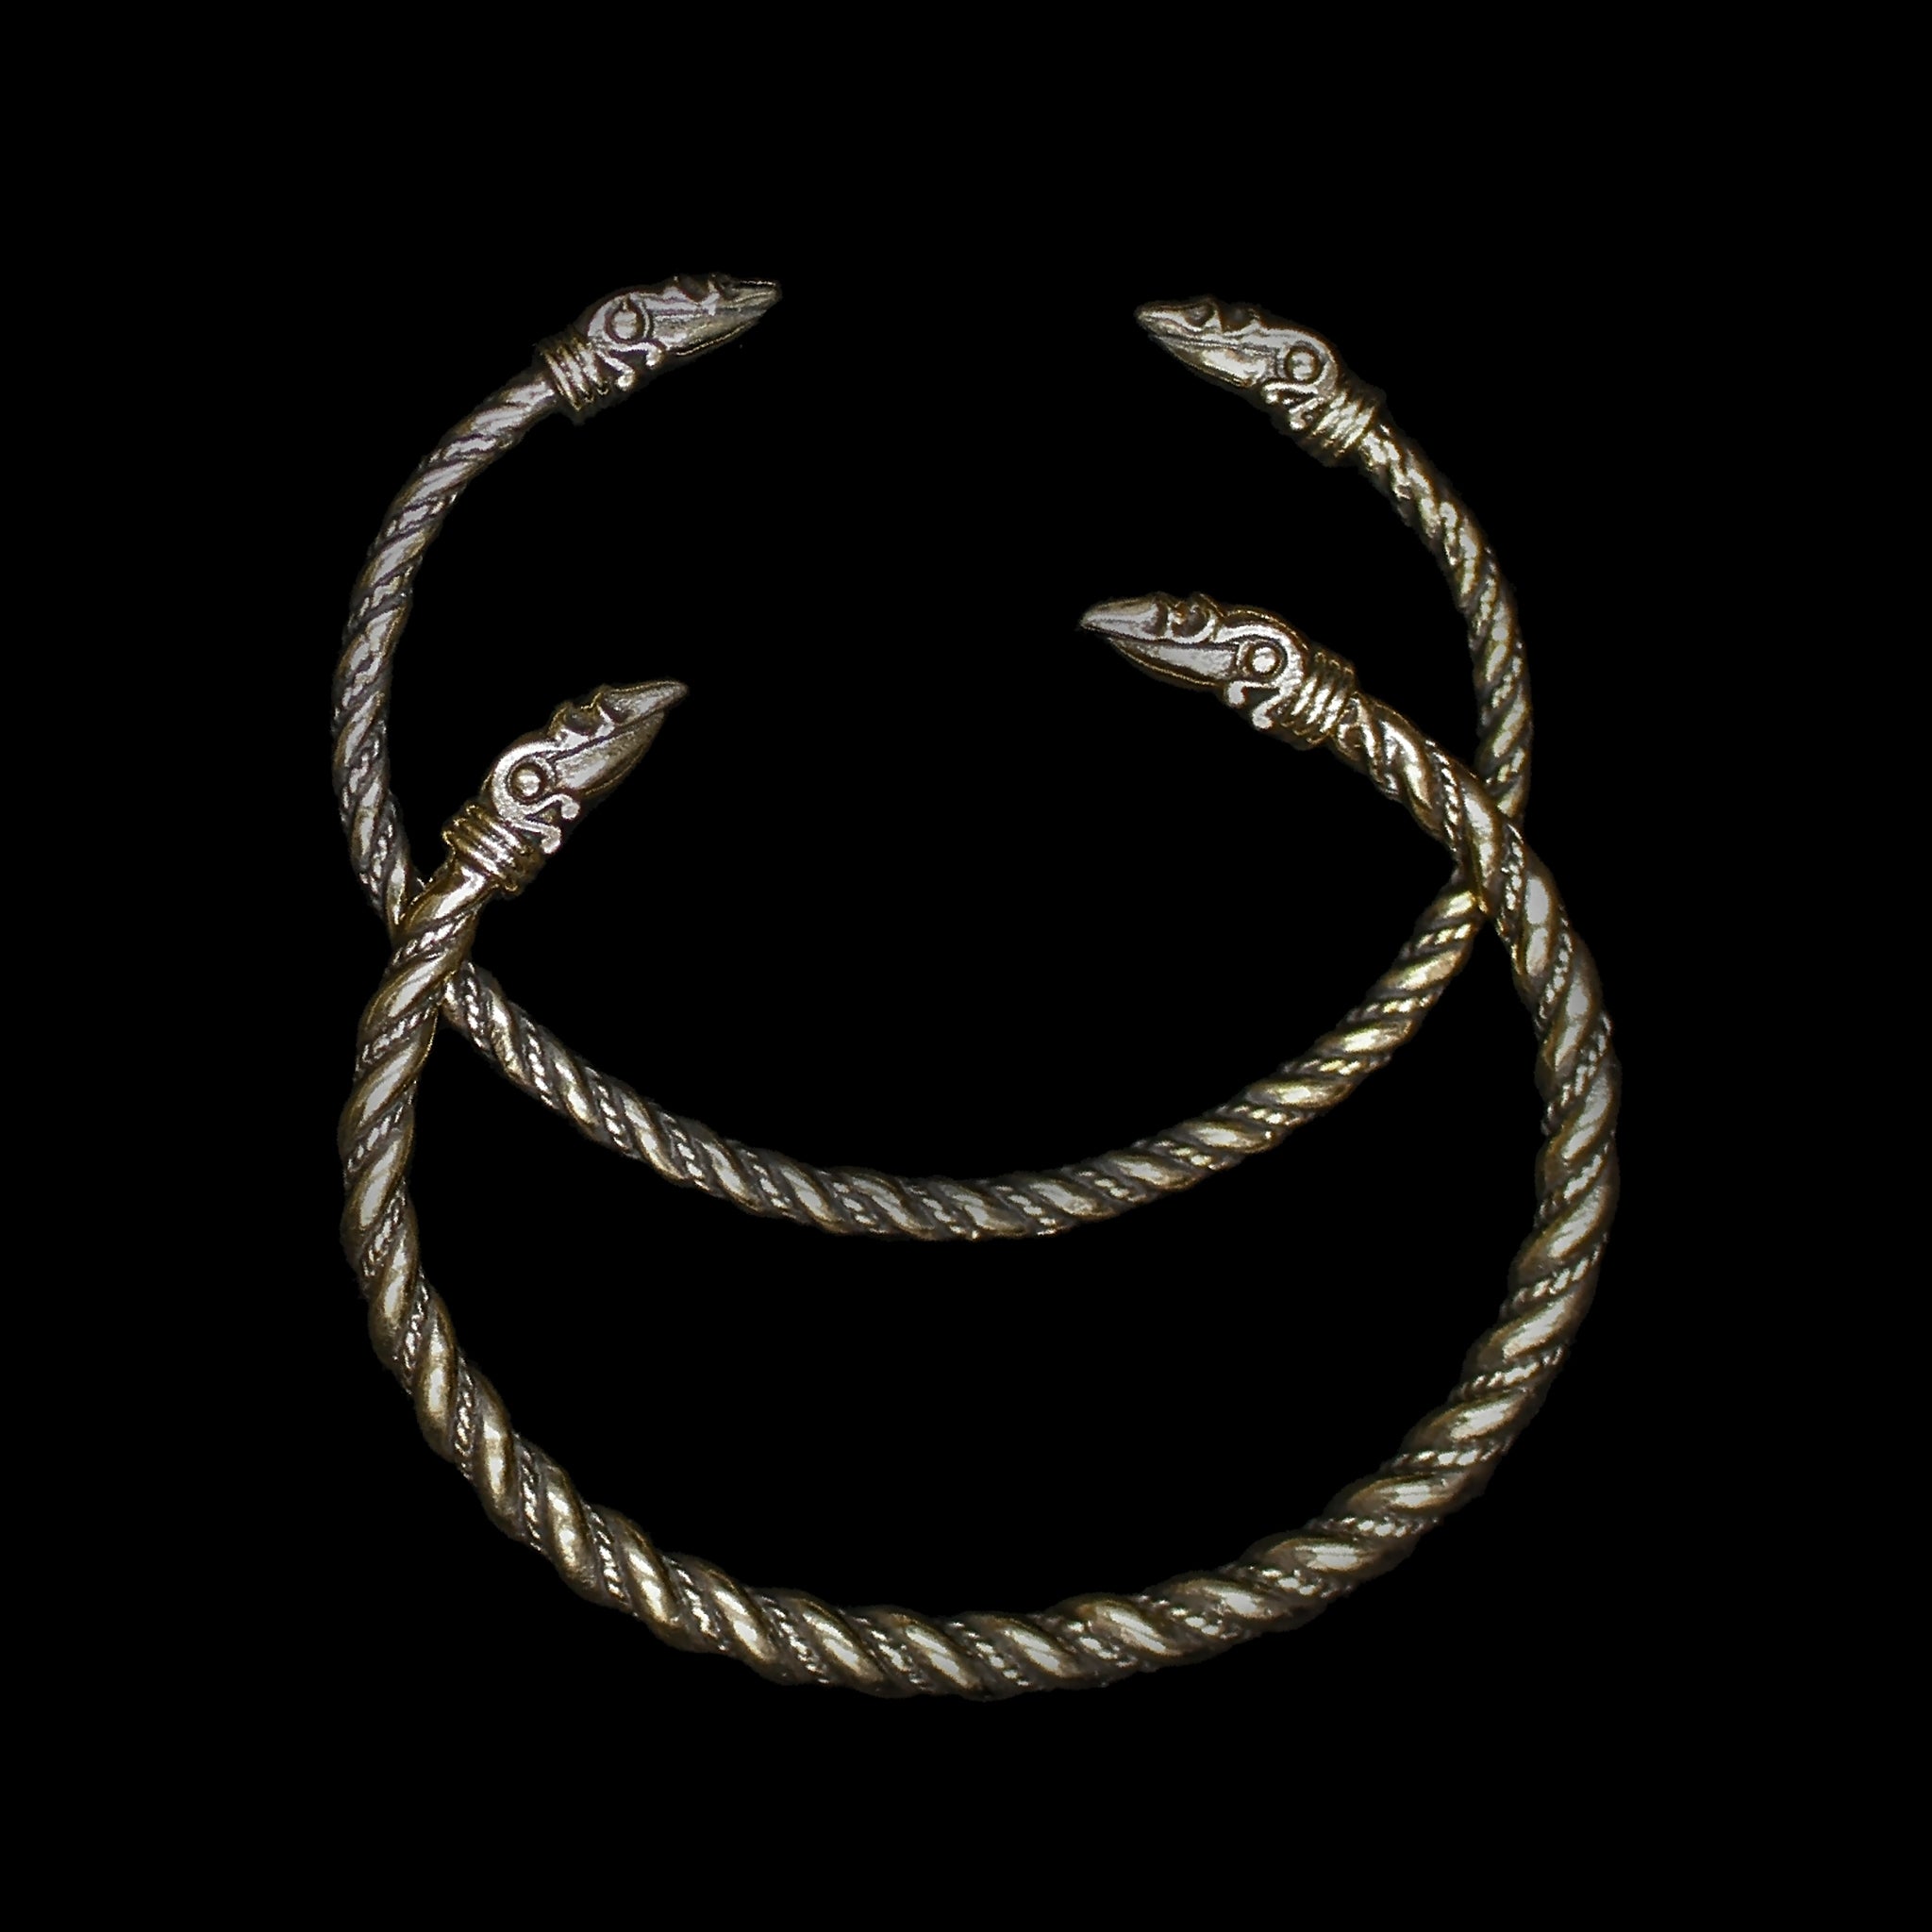 Twisted Bronze Bracelets With Raven Heads